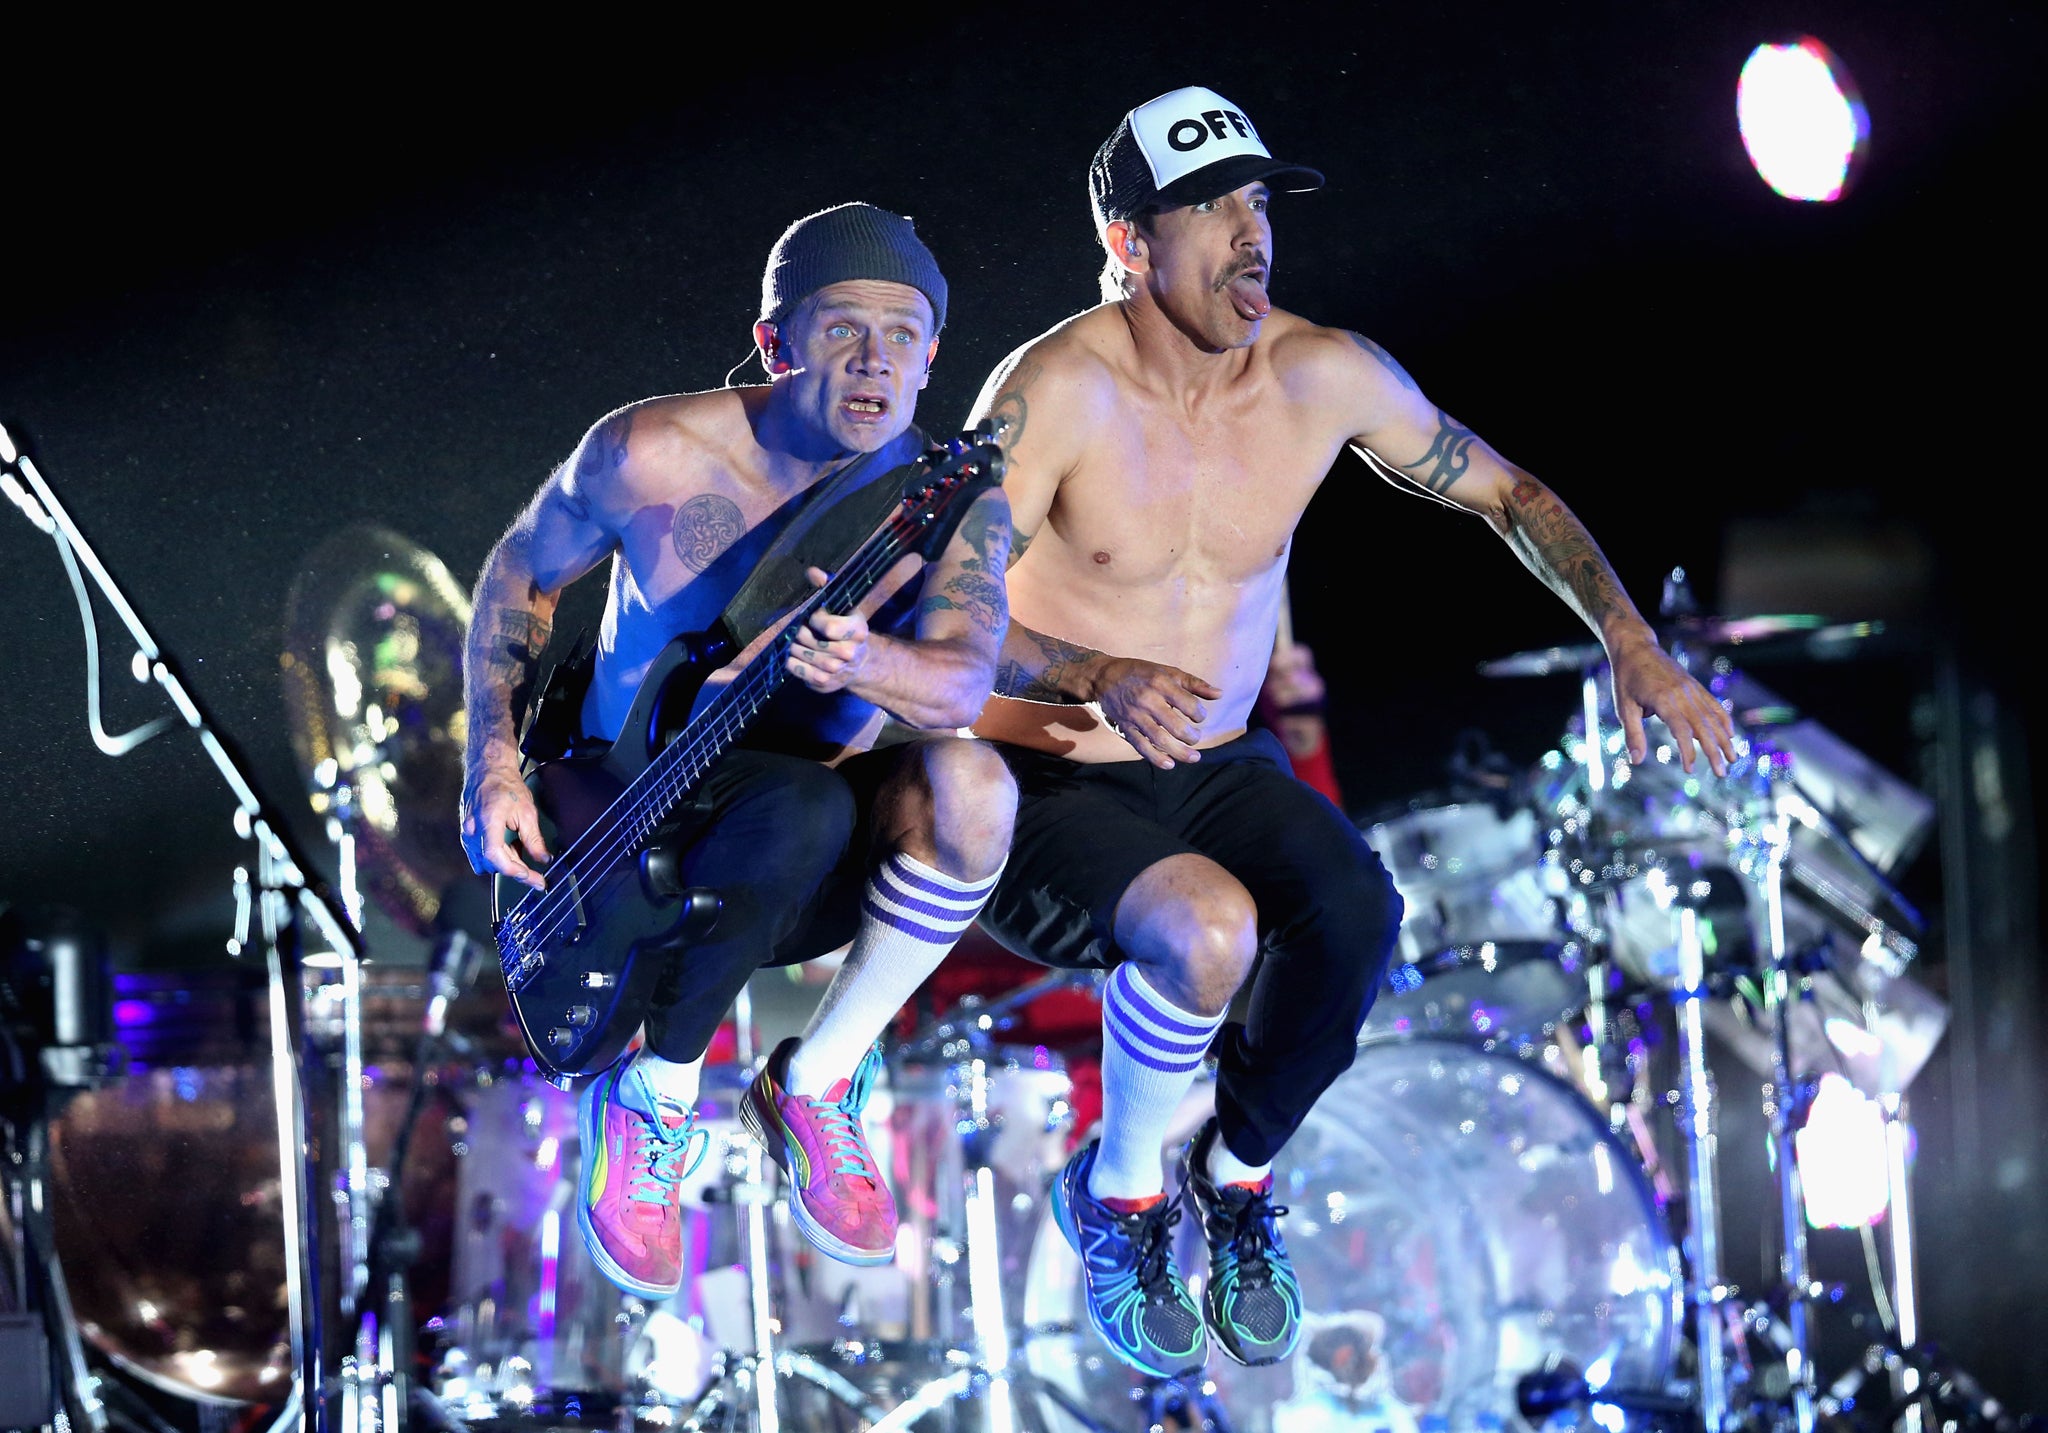 Flea and Anthony Kiedis from the Red Hot Chili Peppers perform on stage